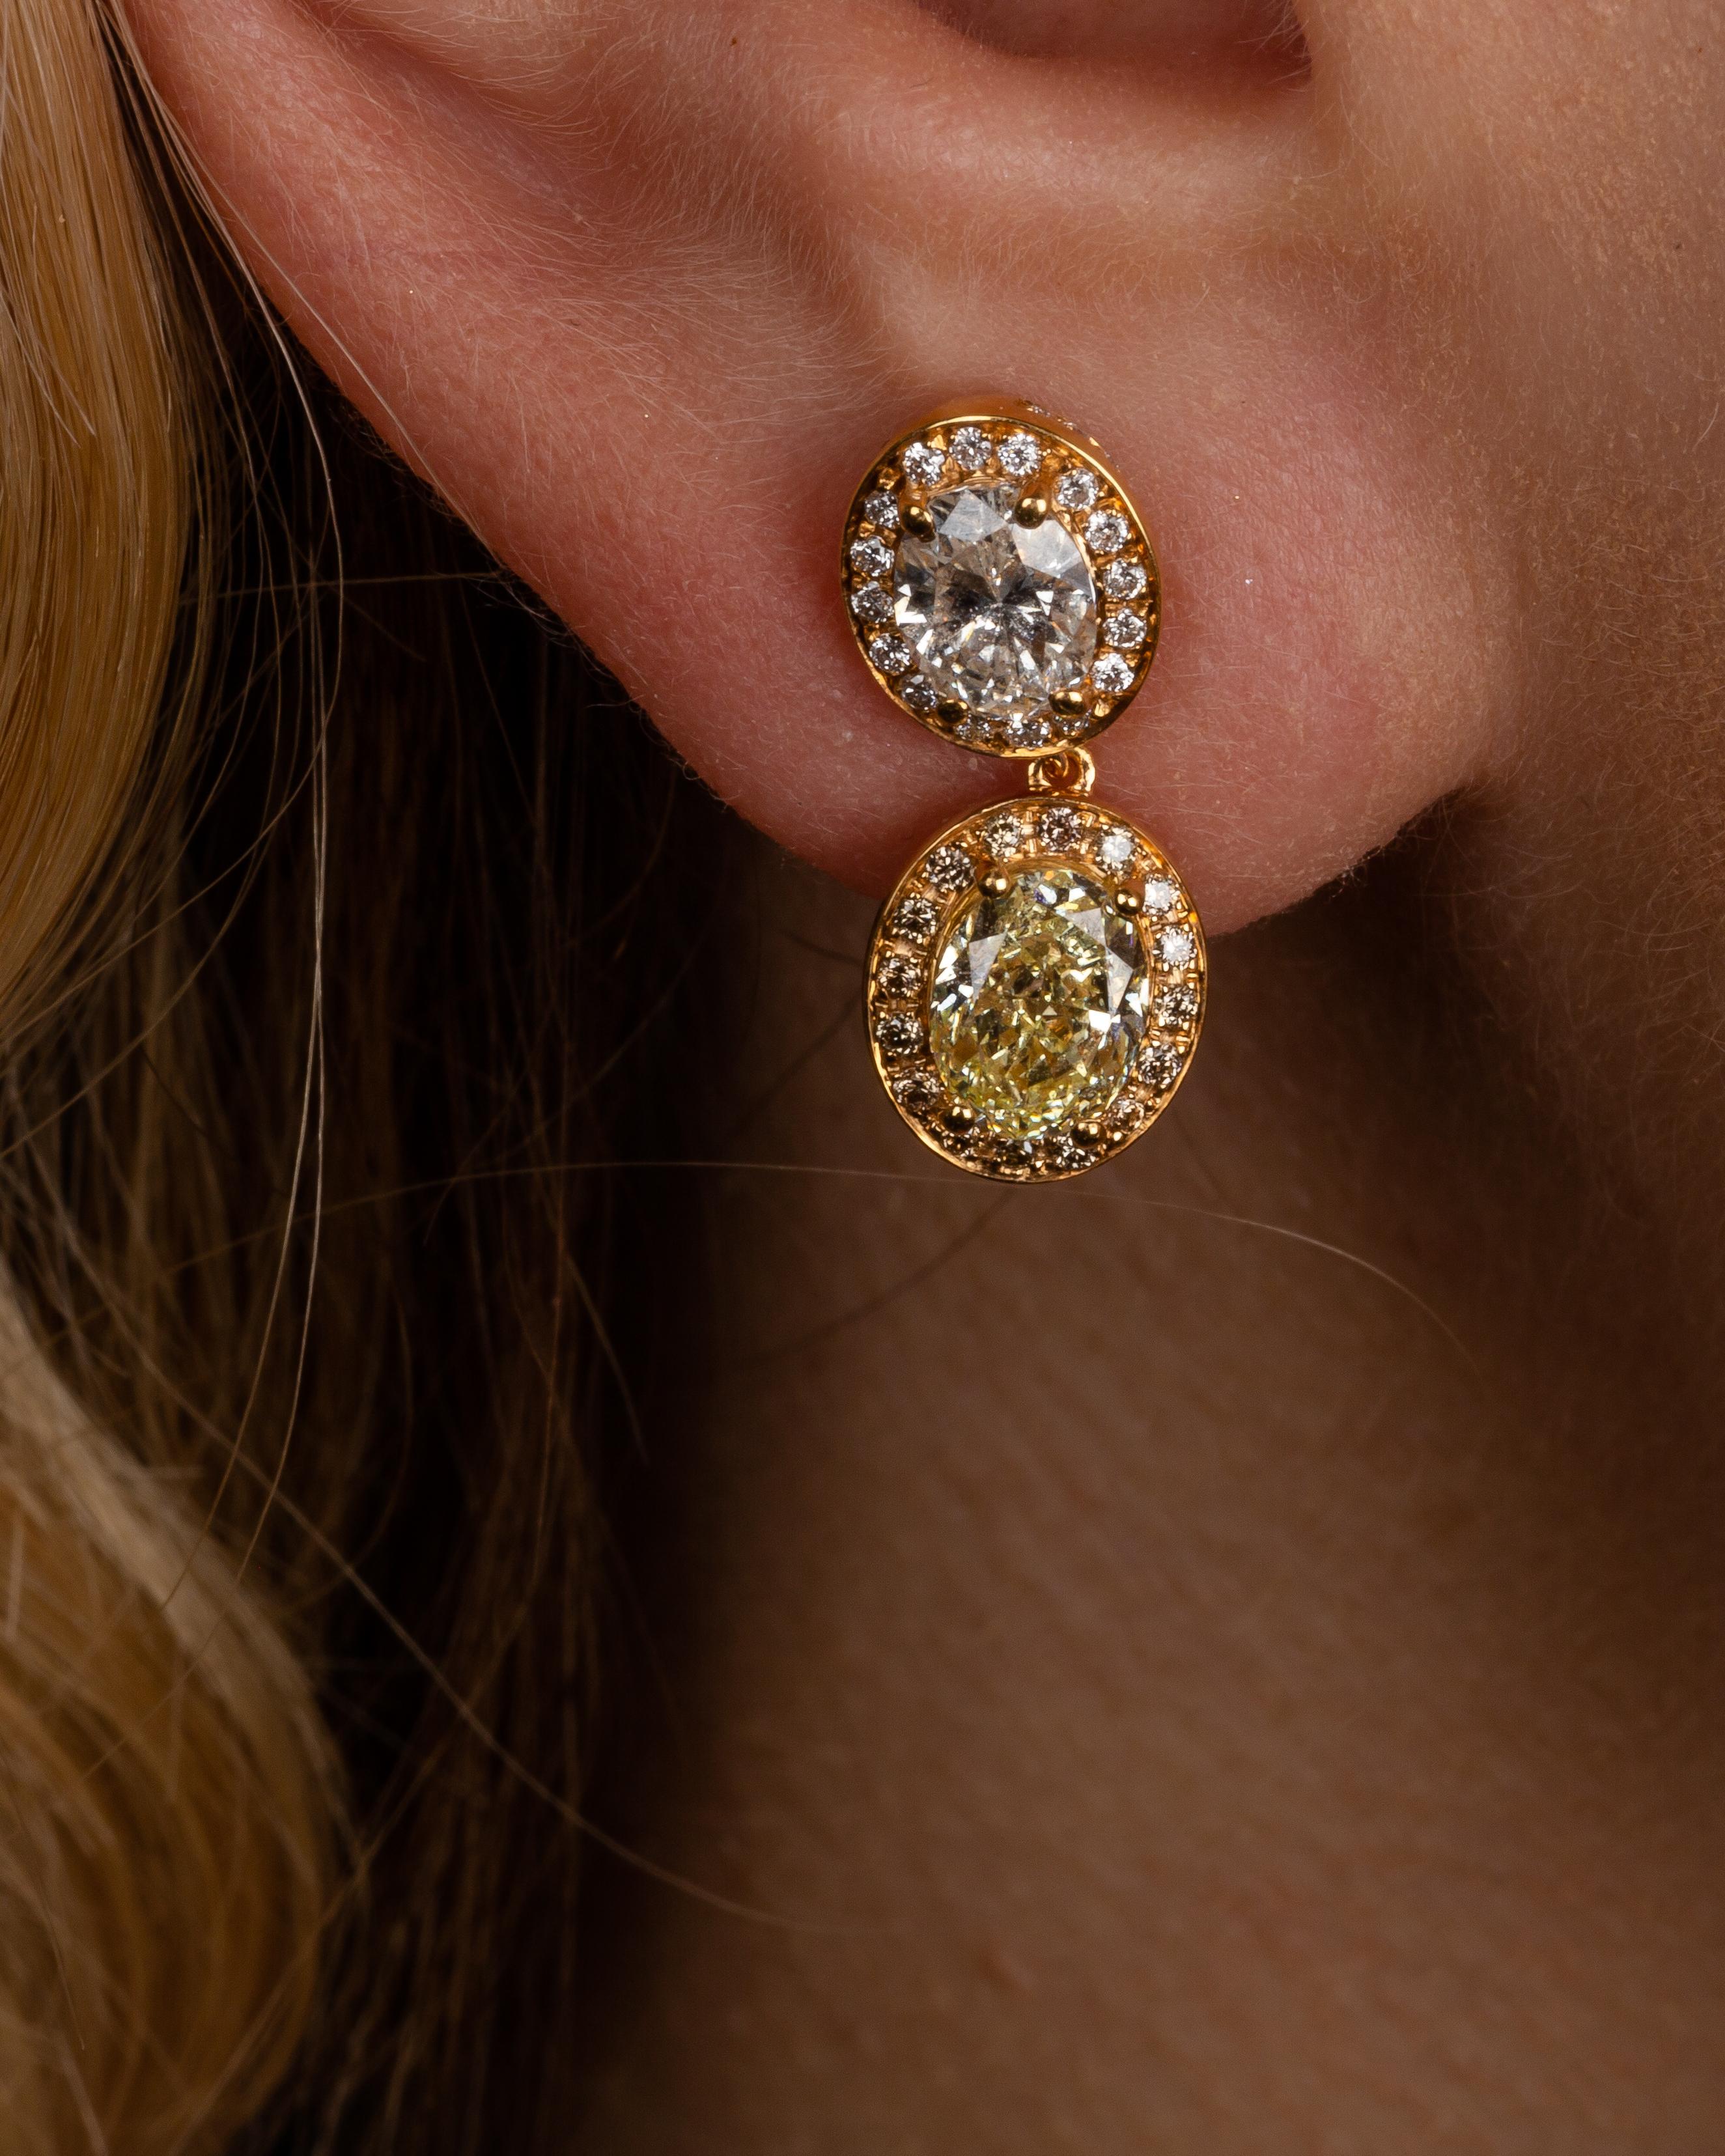 This 18K yellow gold classy drop earrings are from our Divine Collection. It is a perfect combination of a 2 oval shape yellow diamonds in total of 1.39 Carat and 2 oval shape colourless diamonds in total of 0.96 Carat. All the diamonds are